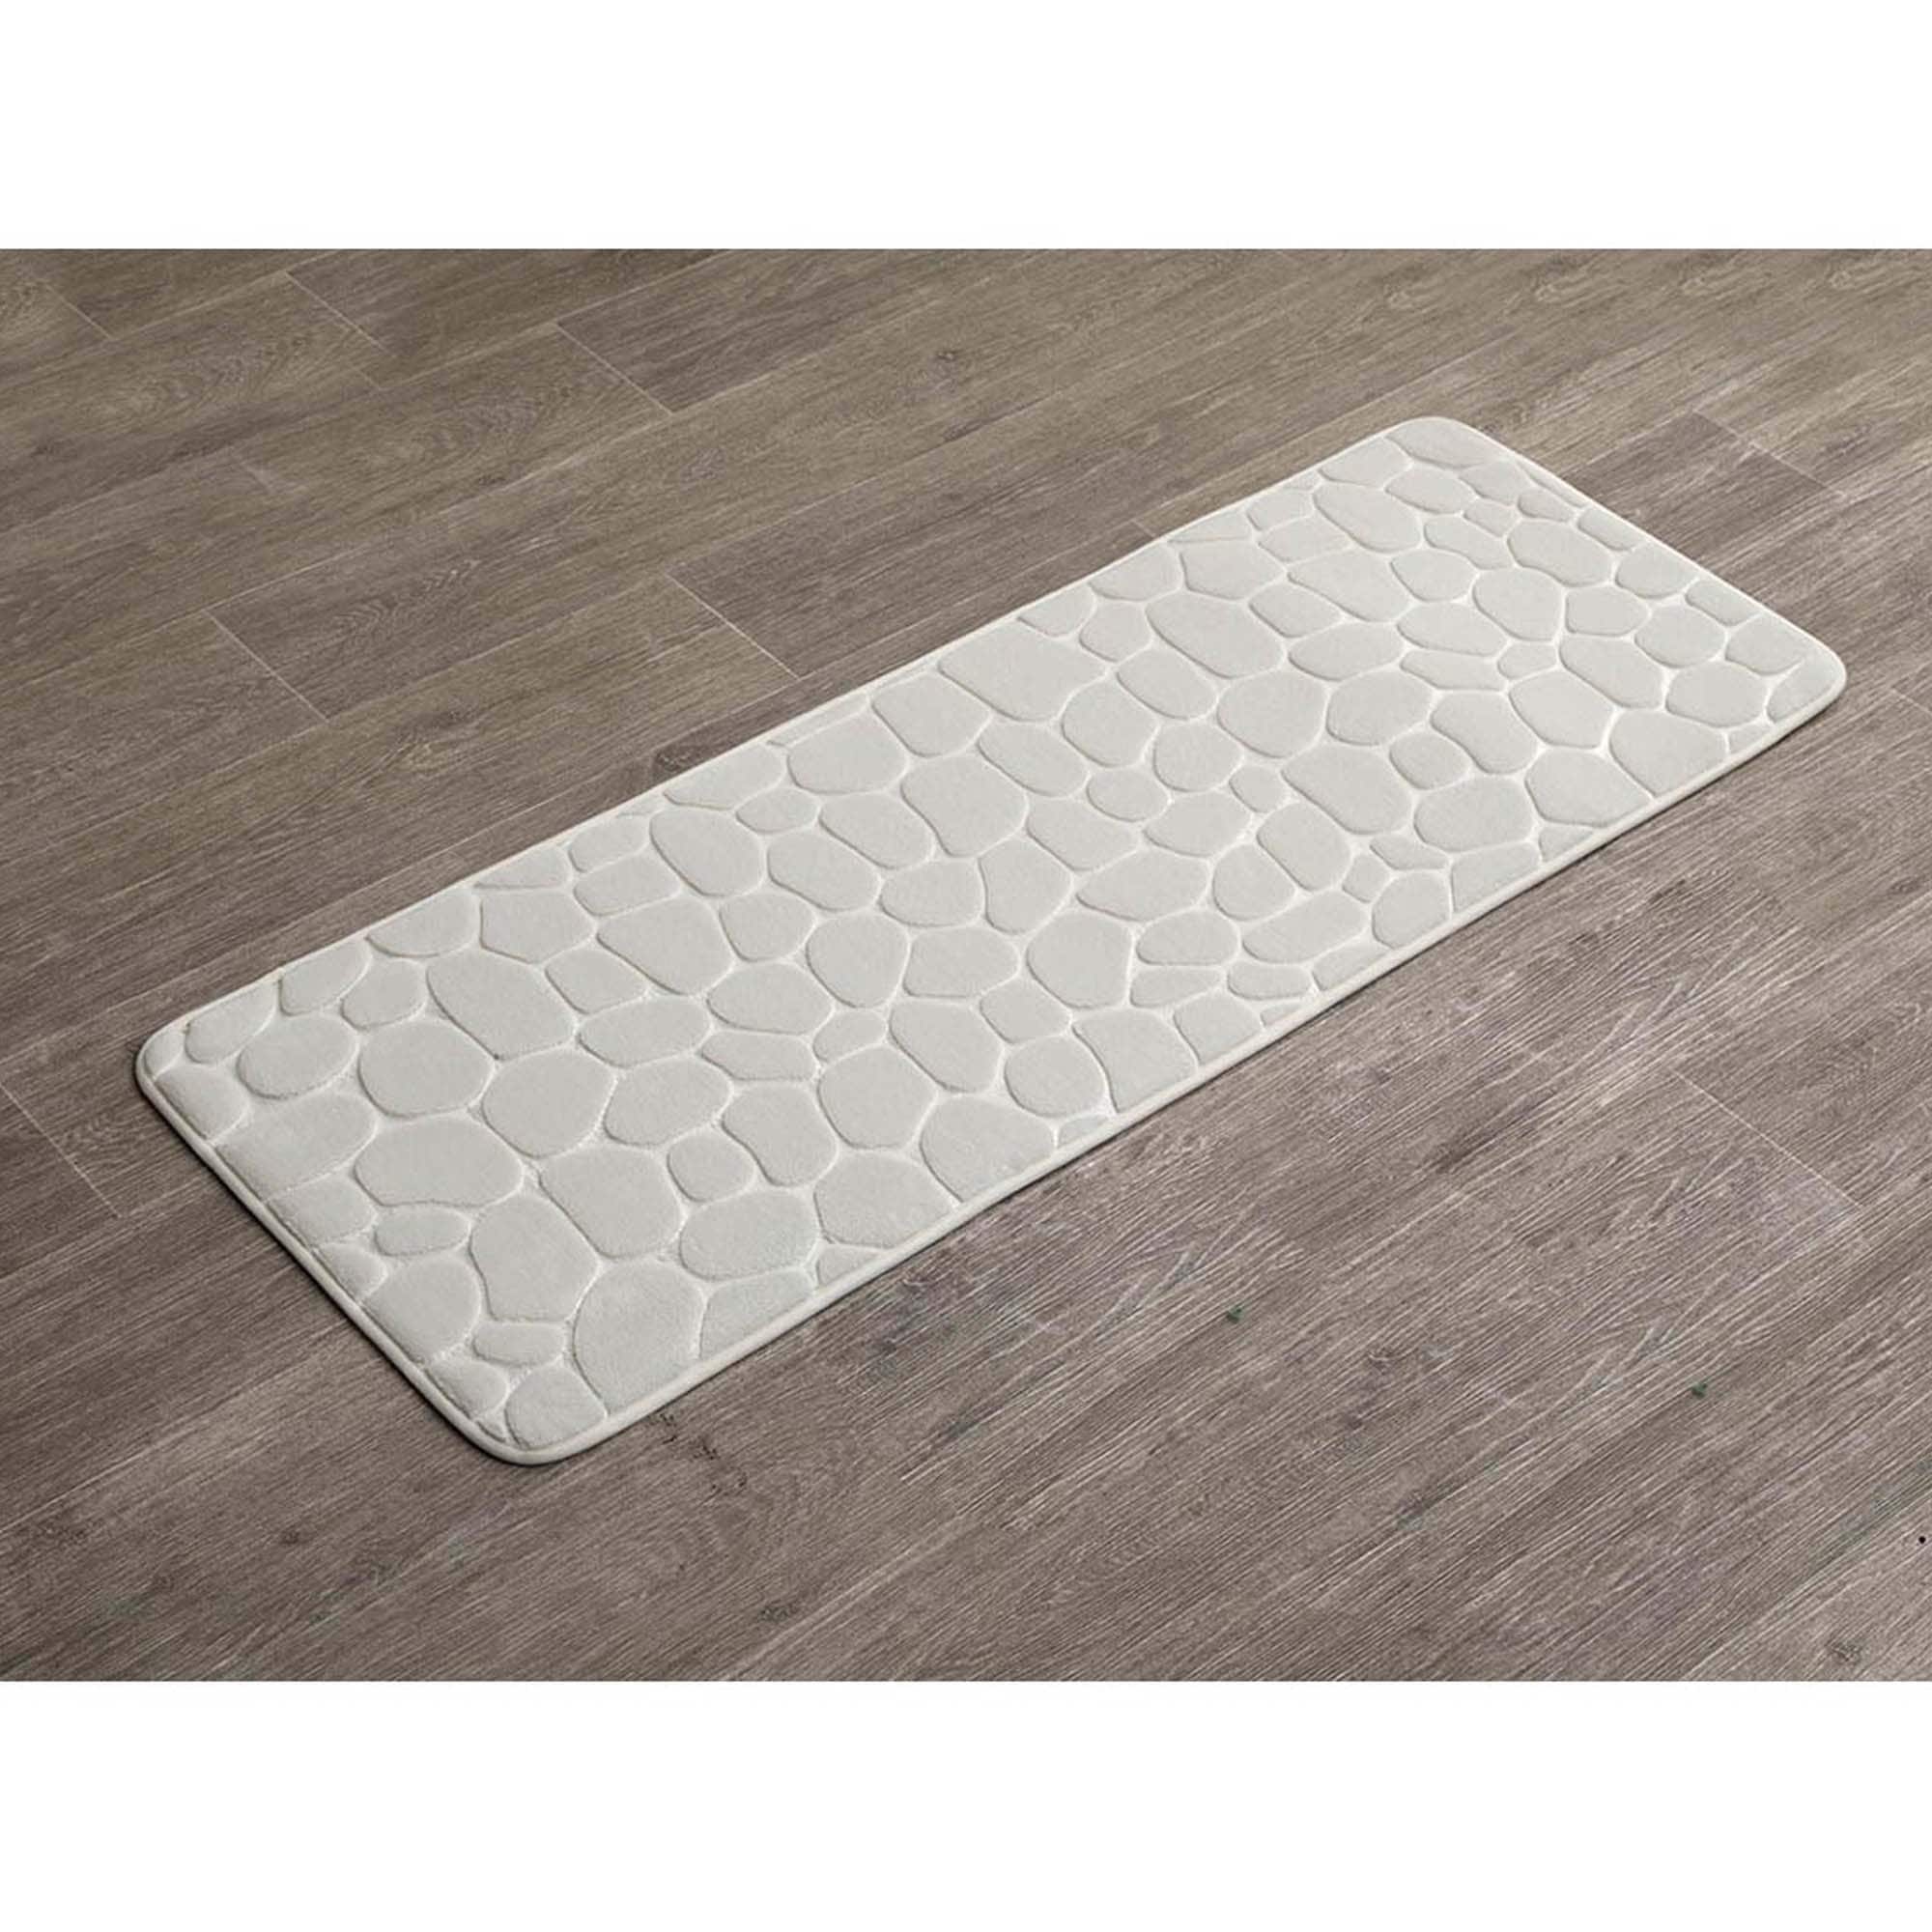 Made to Order Memory Foam Off-White Bath Mat - Bed Bath & Beyond